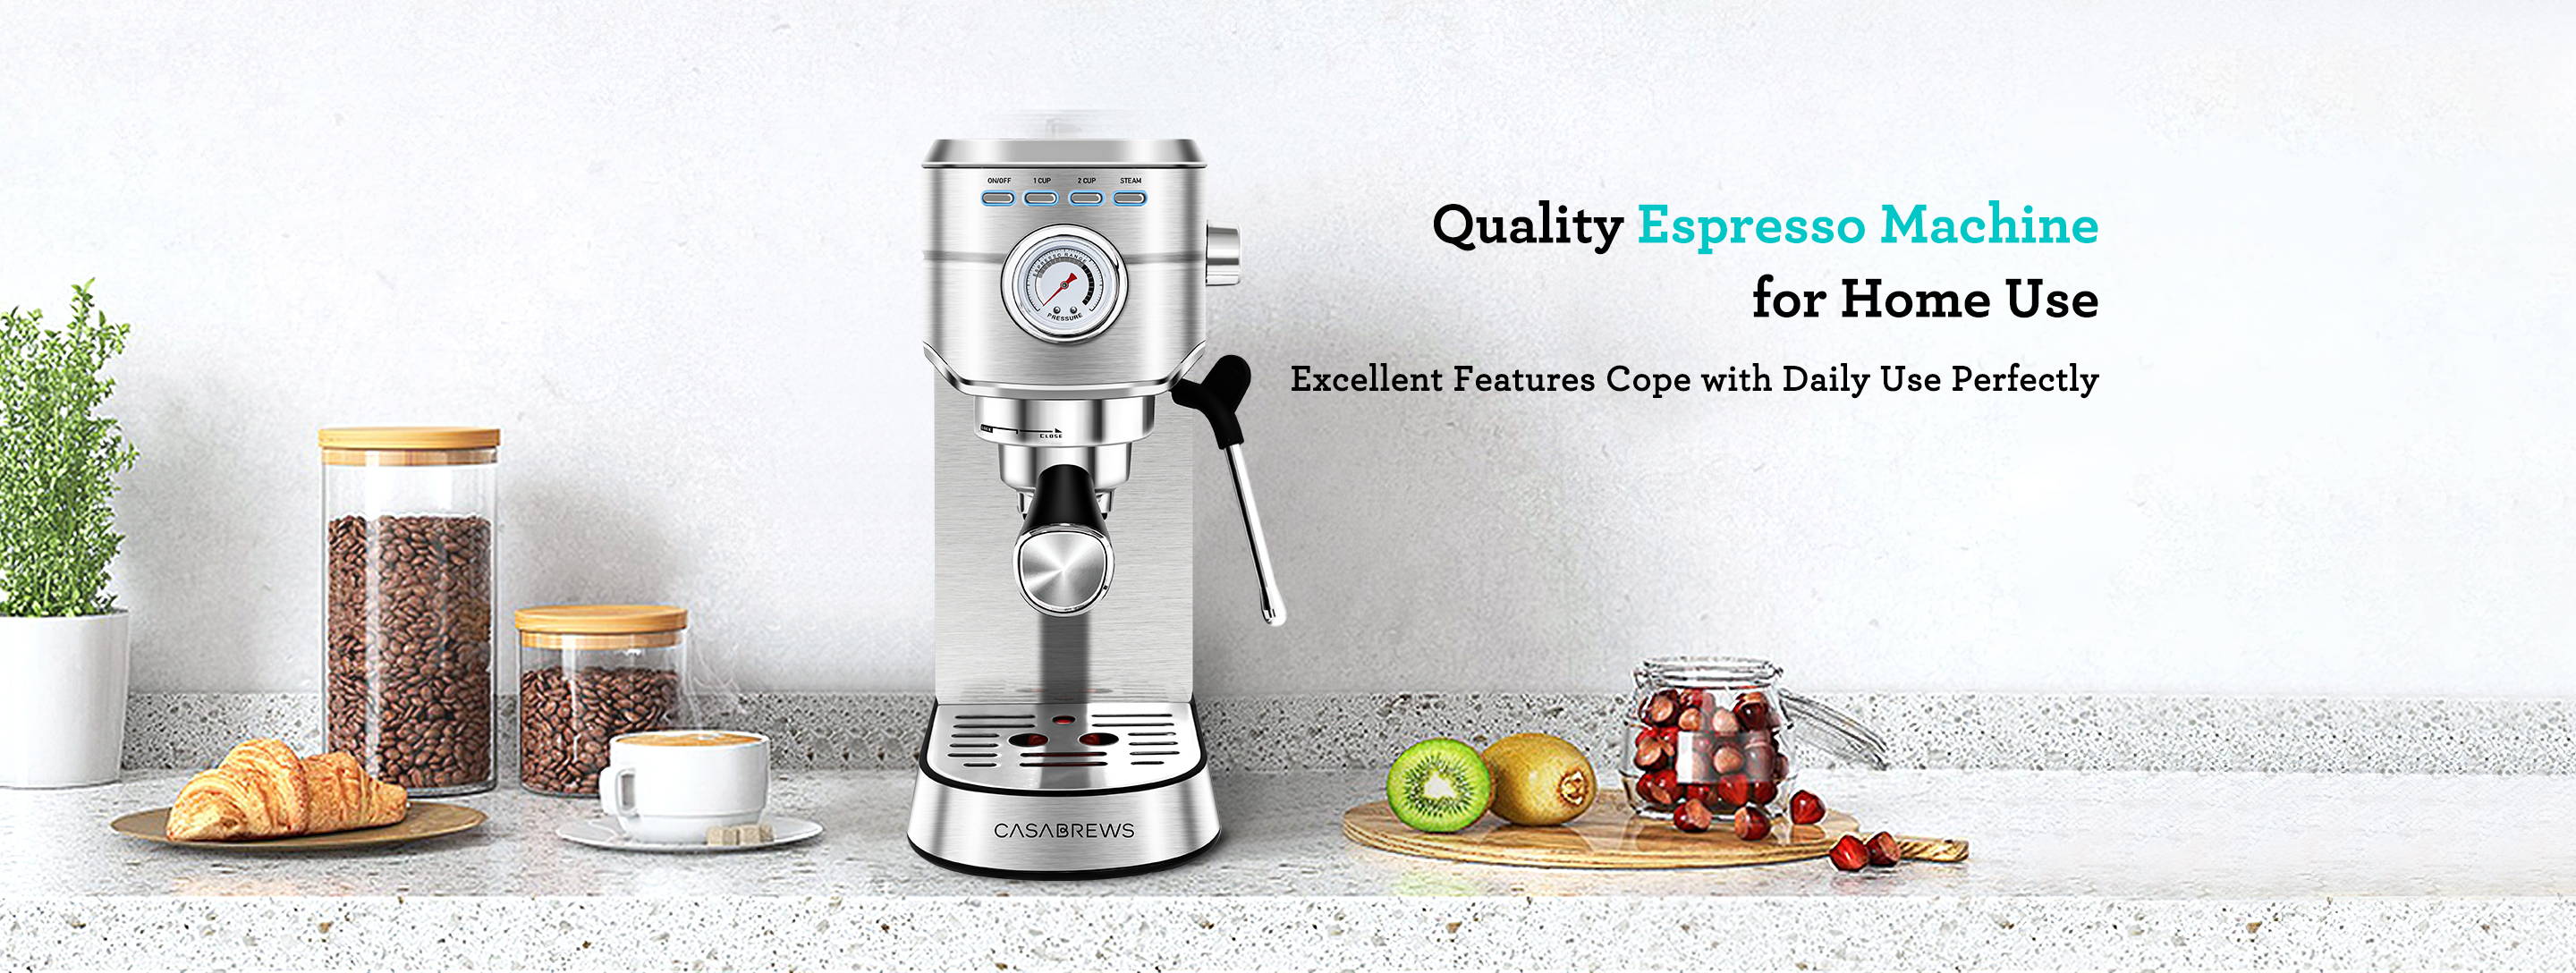 Quality espresso machine for home use excellent features cope with daily use perfectly